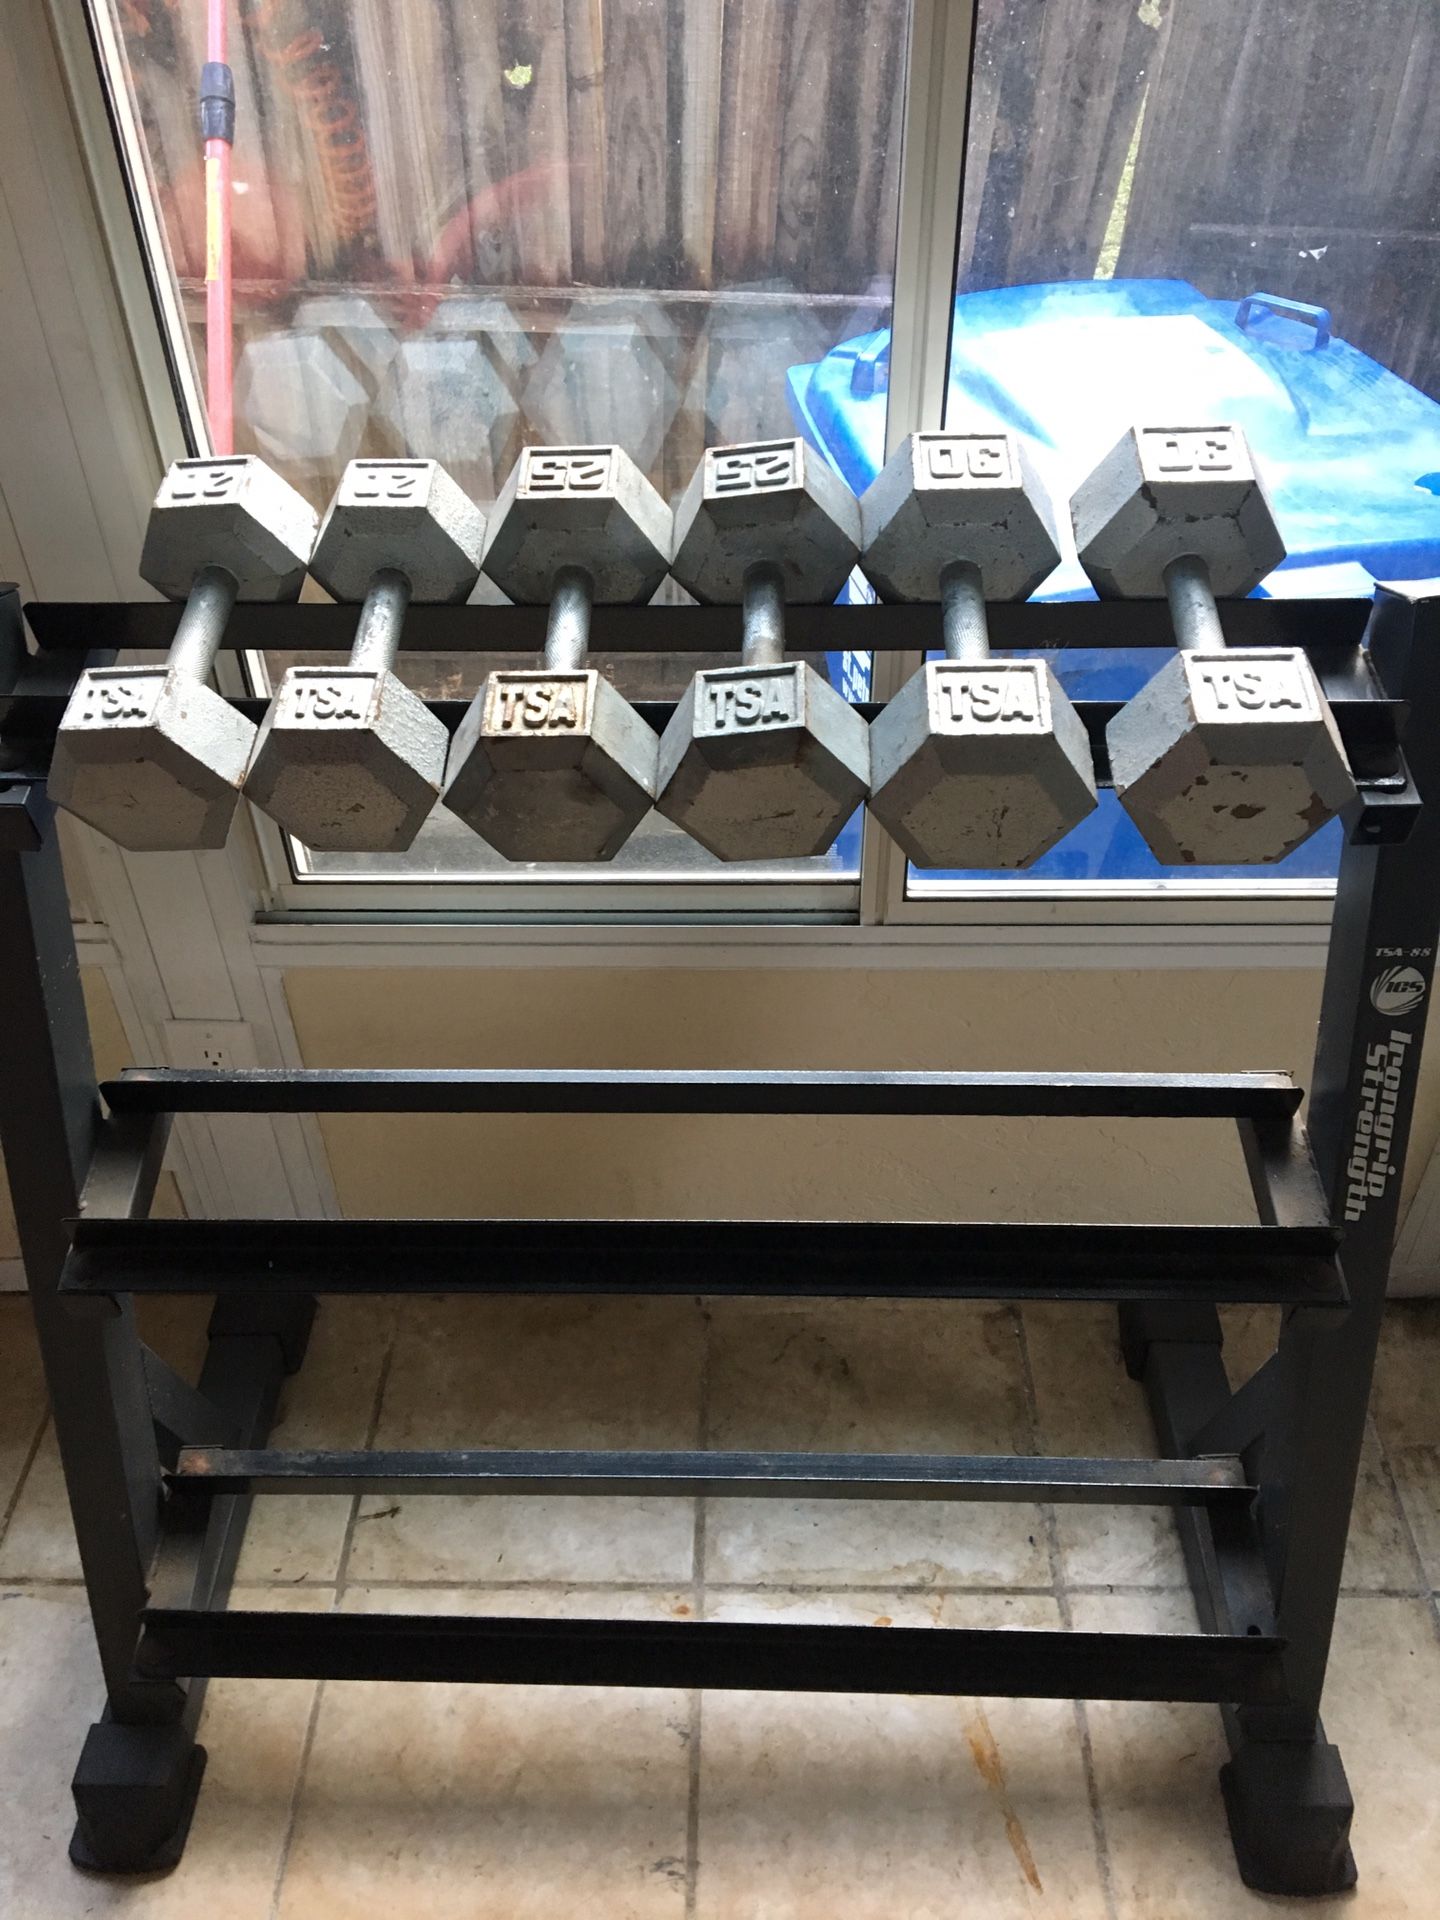 Dumbbell rack with three sets of dumbbells